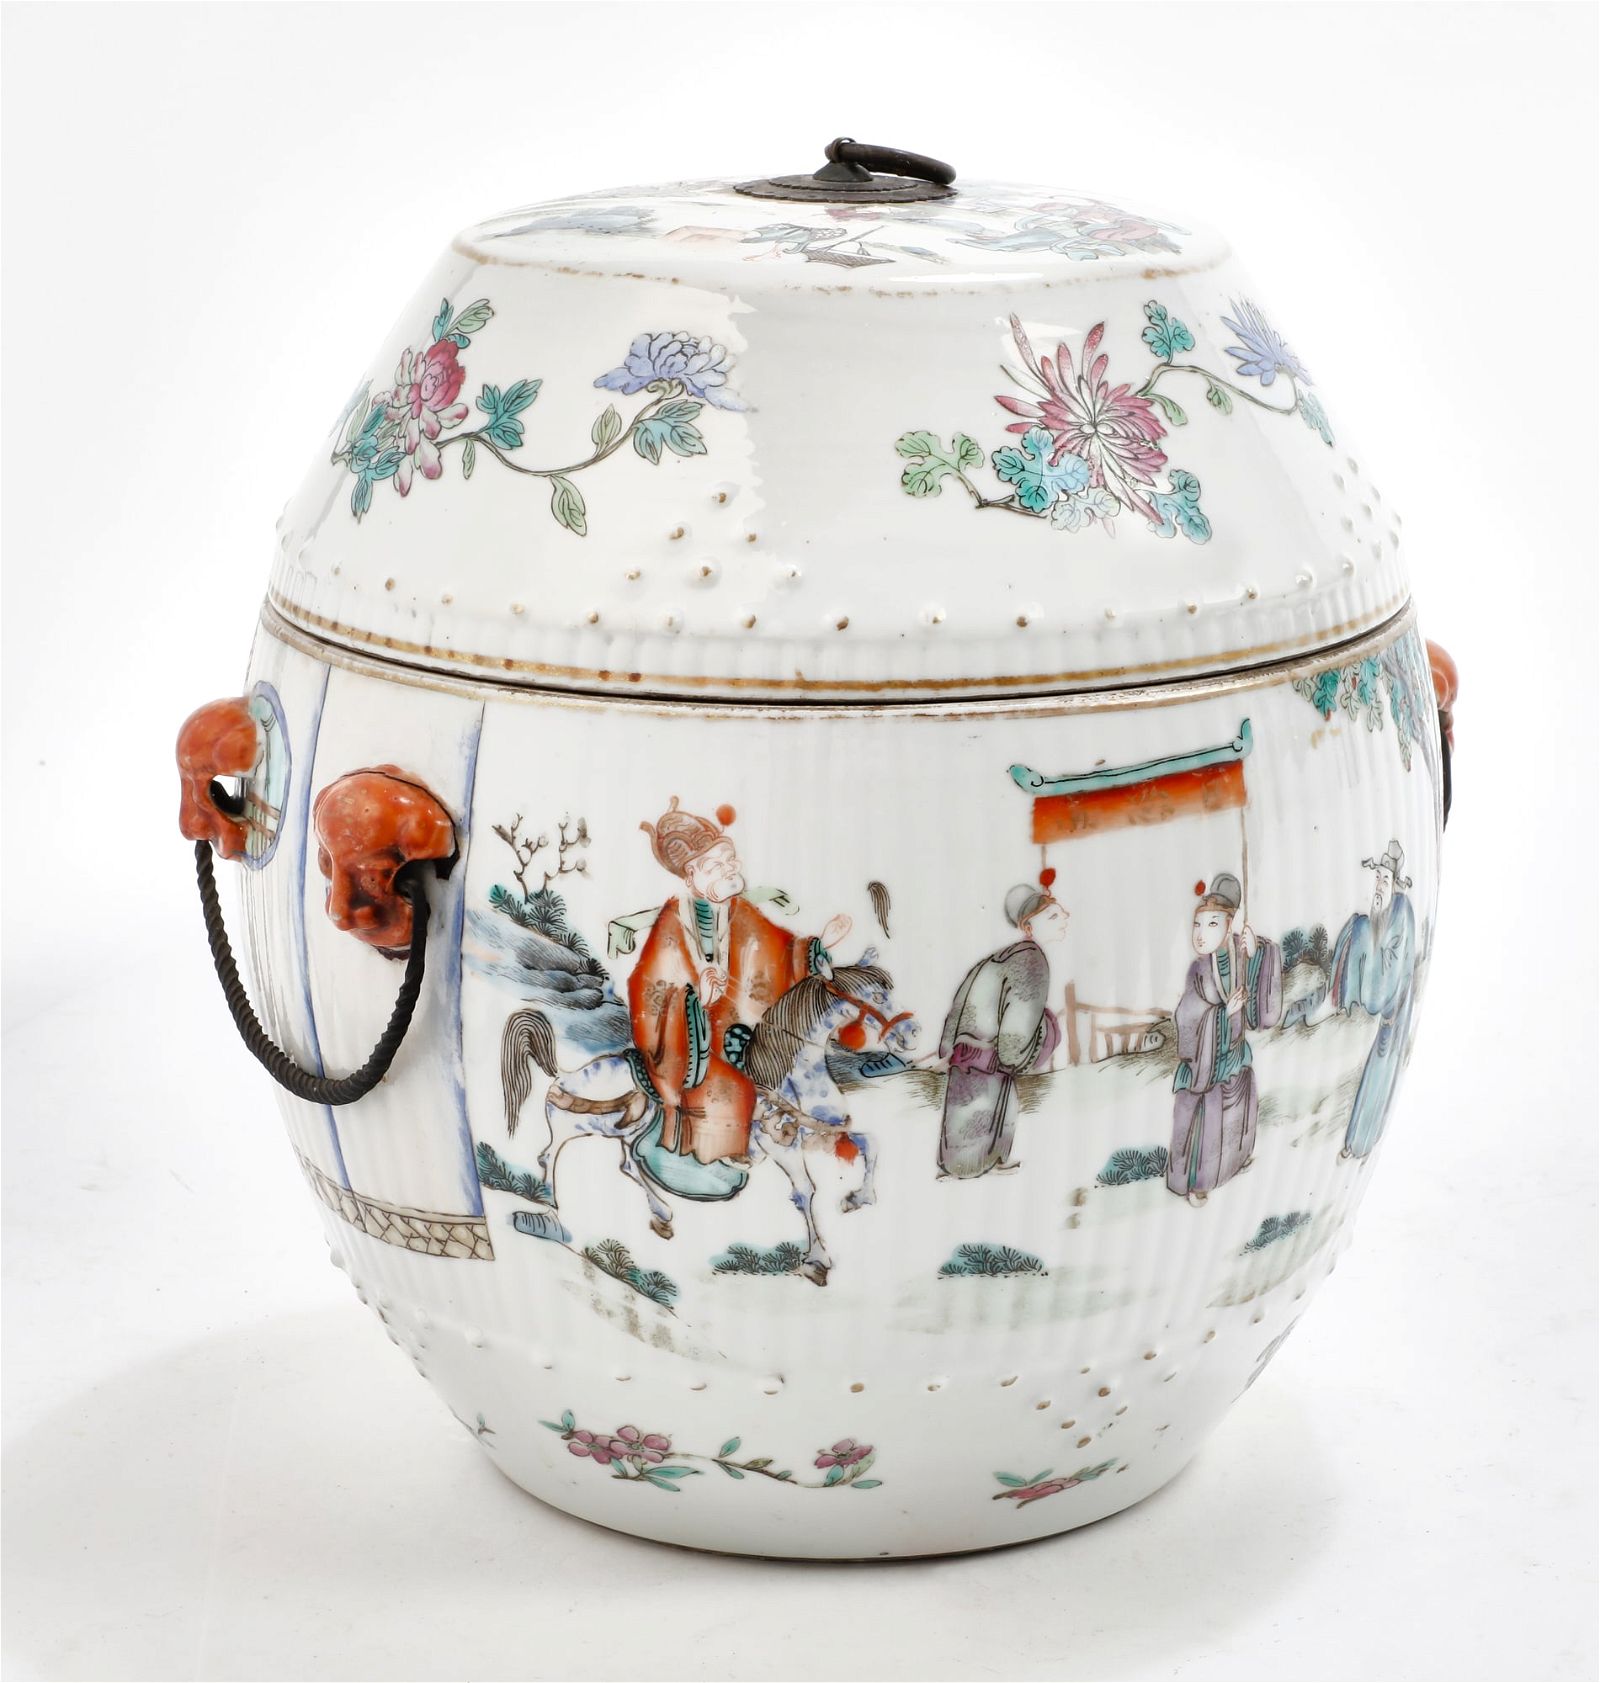 CHINESE EXPORT PORCELAIN FAMILLE